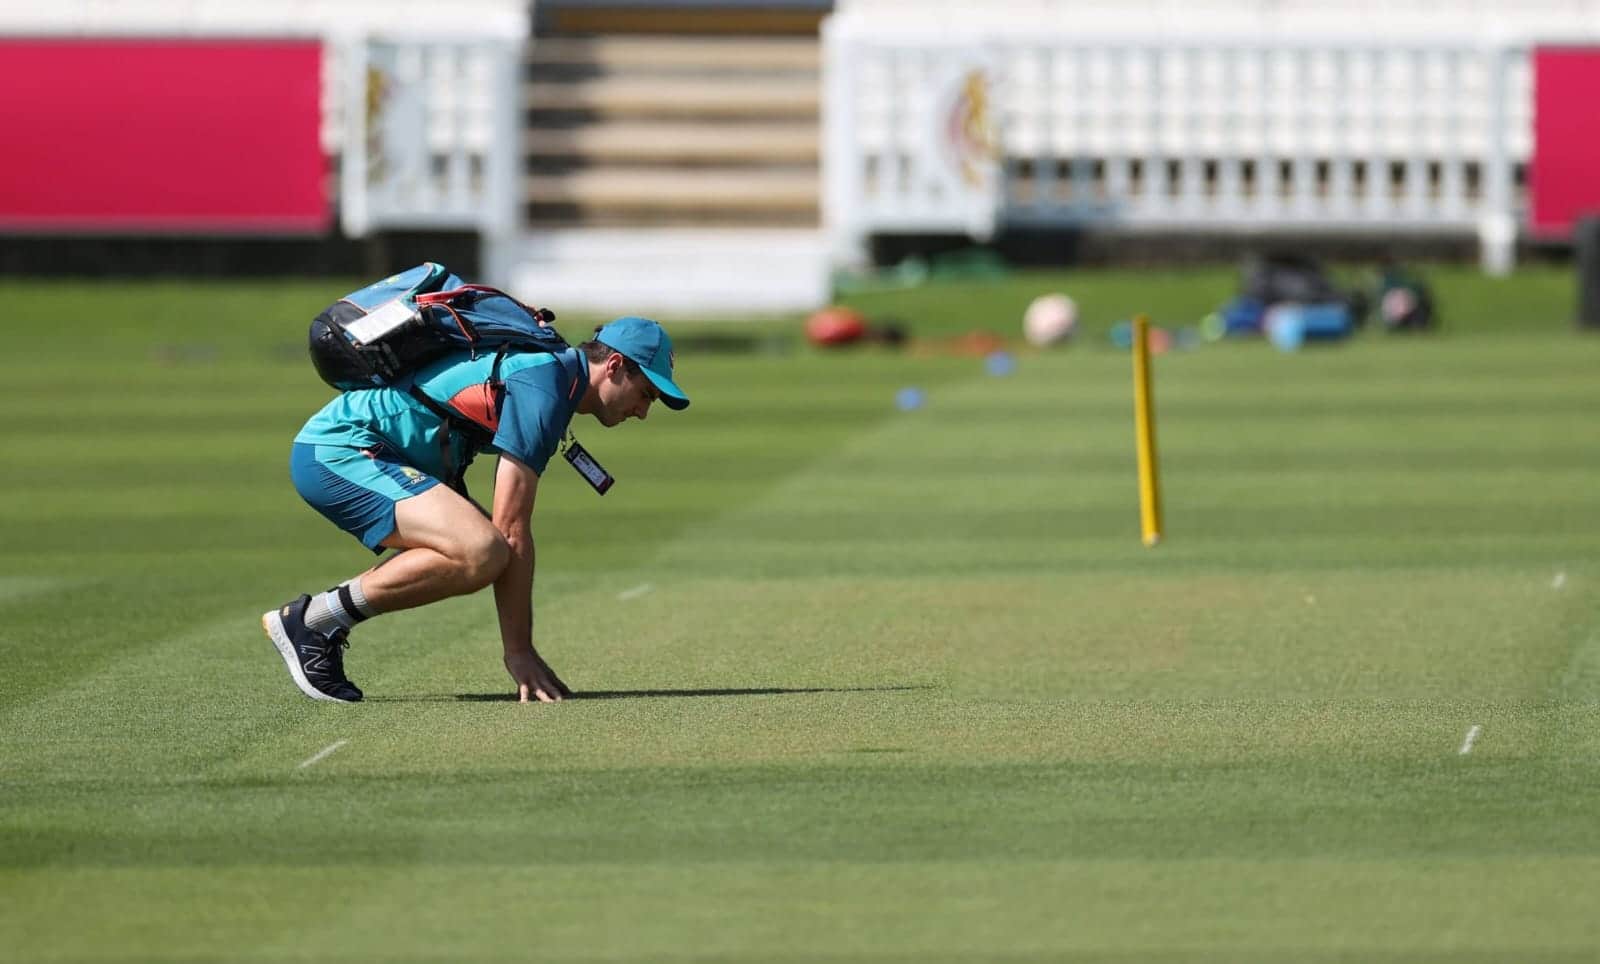 [Watch] Here's The First Look Of Lord's Pitch Ahead Of Second Ashes Test